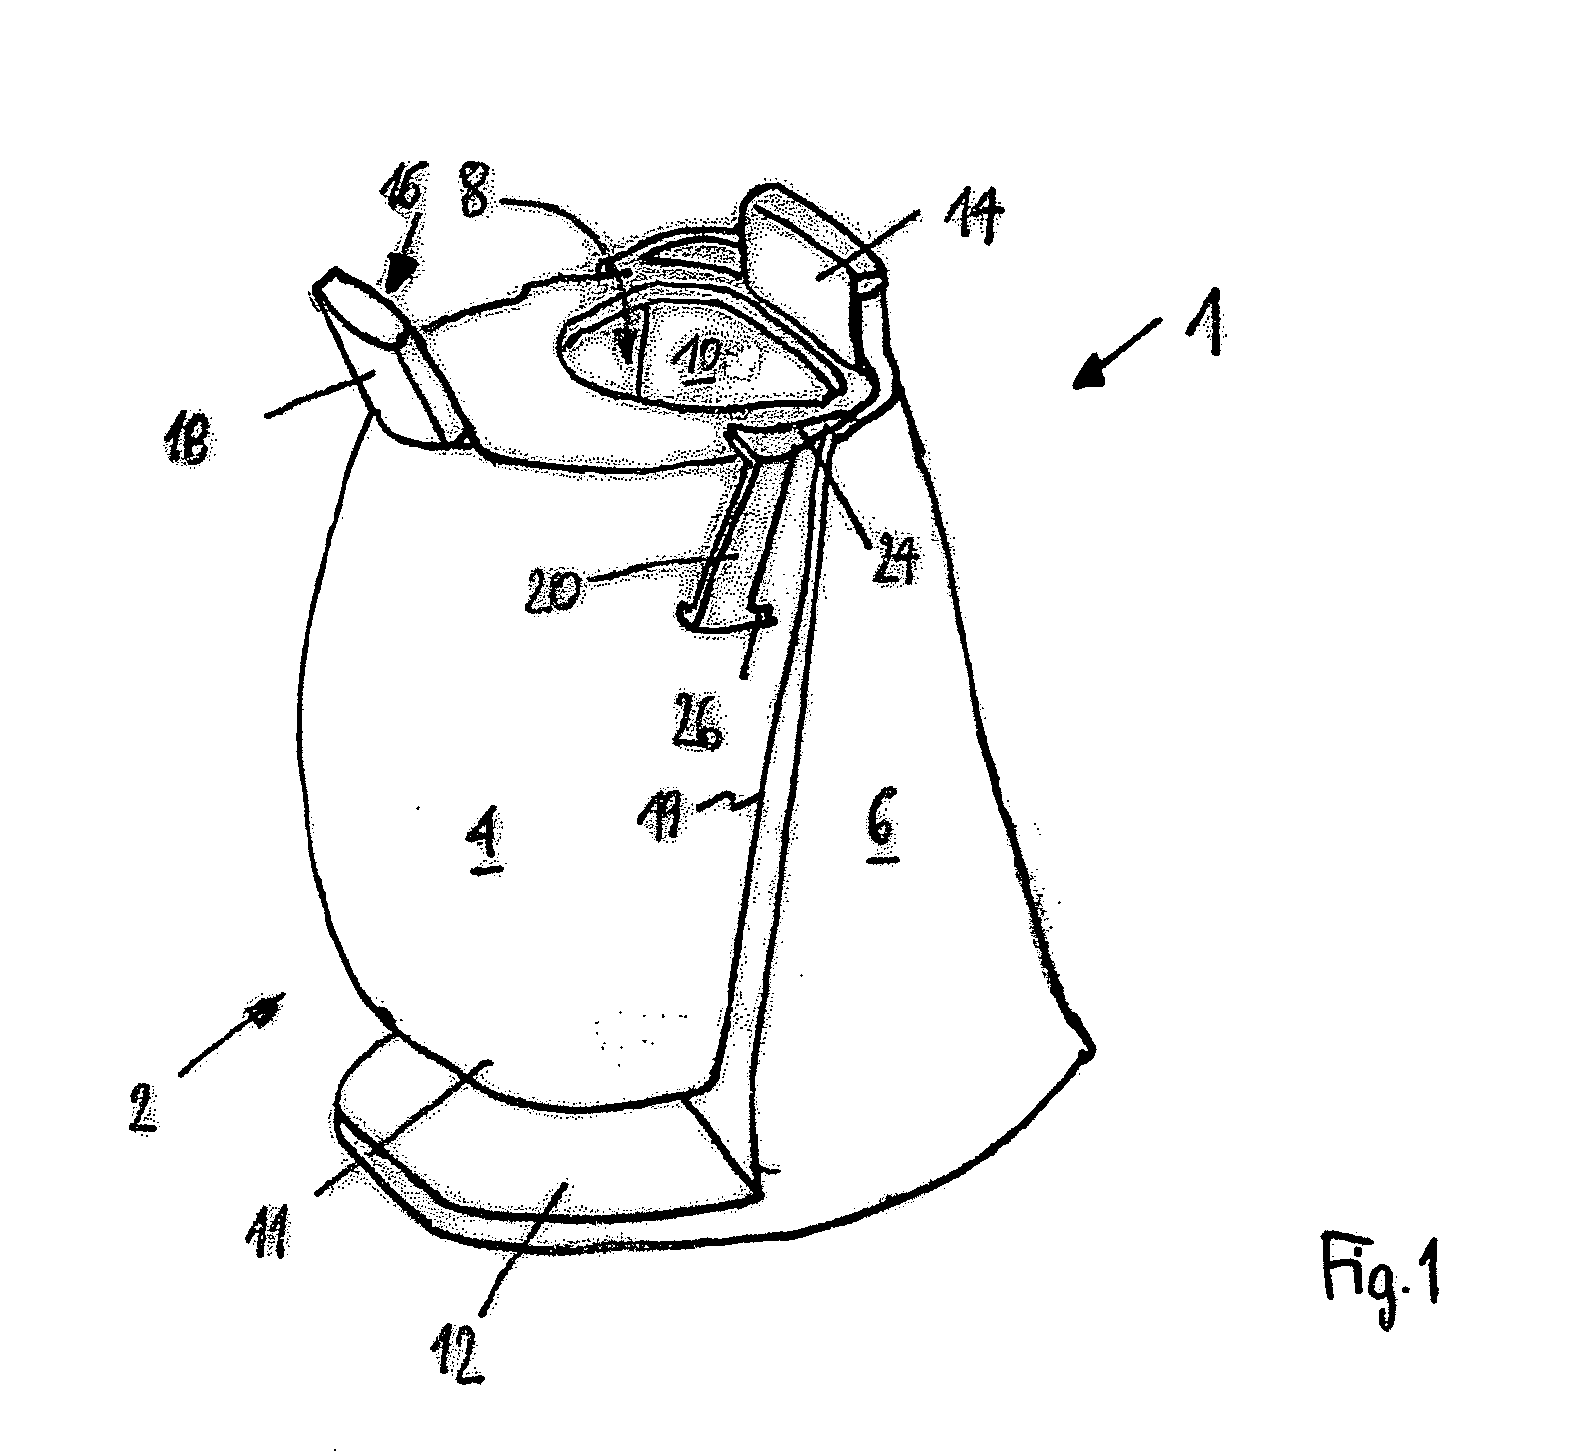 Adjustable fitness apparatus having a pressure chamber and an exercise device with a seat